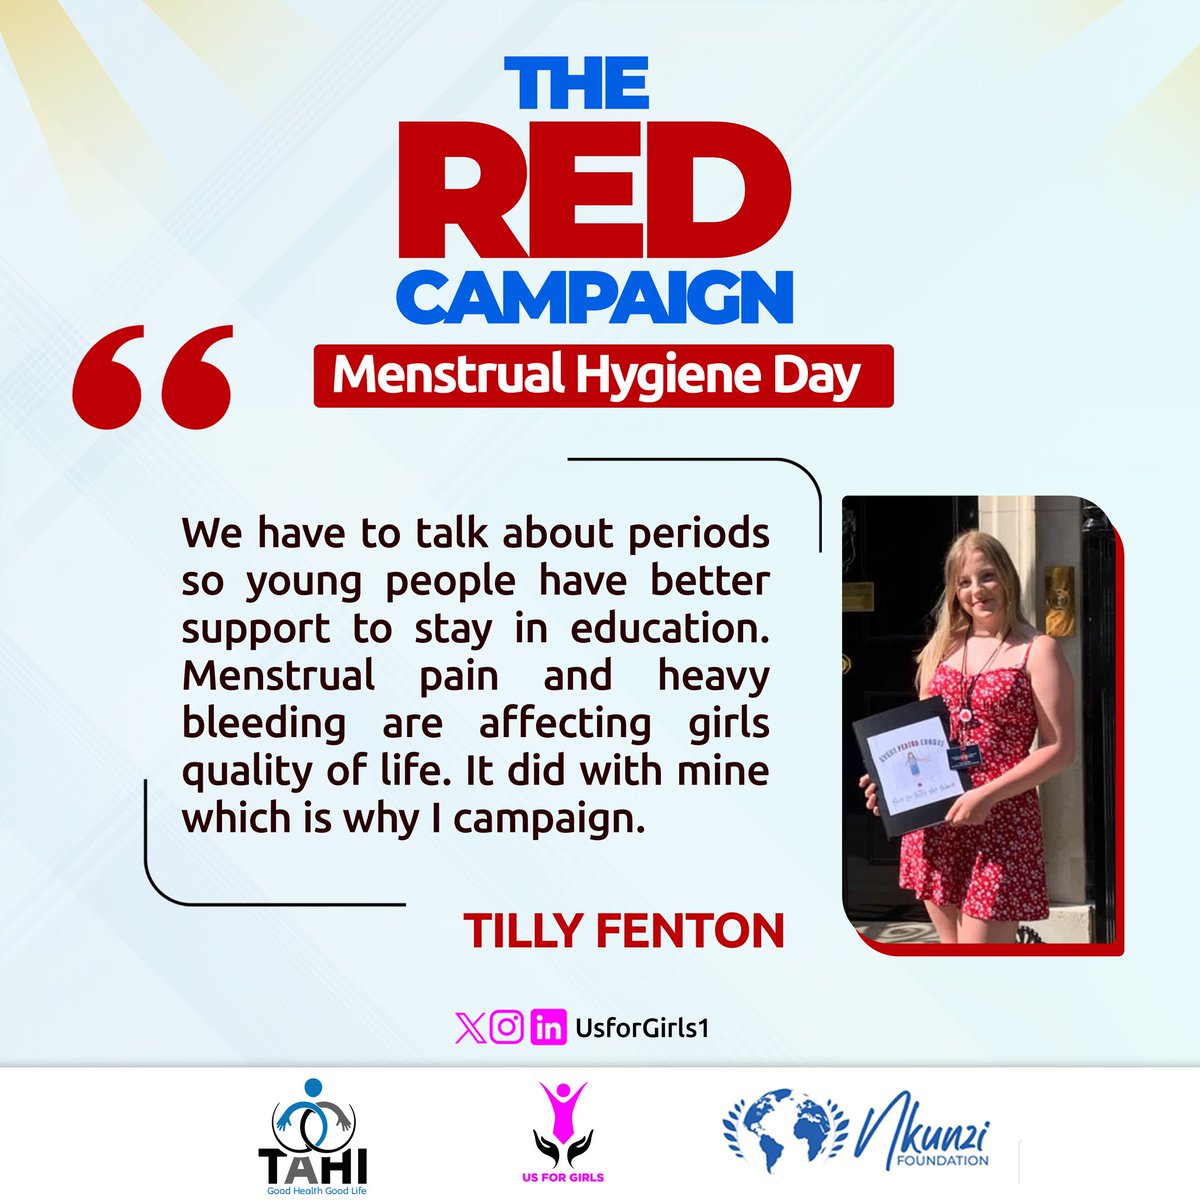 #RedCampaign

@tillyfenton reminds us that we need to normalise conversations around menstruation so that young people can have support to stay in school.
Girls face various period health challenges that affect their quality of life but together we can #EndPeriodPoverty